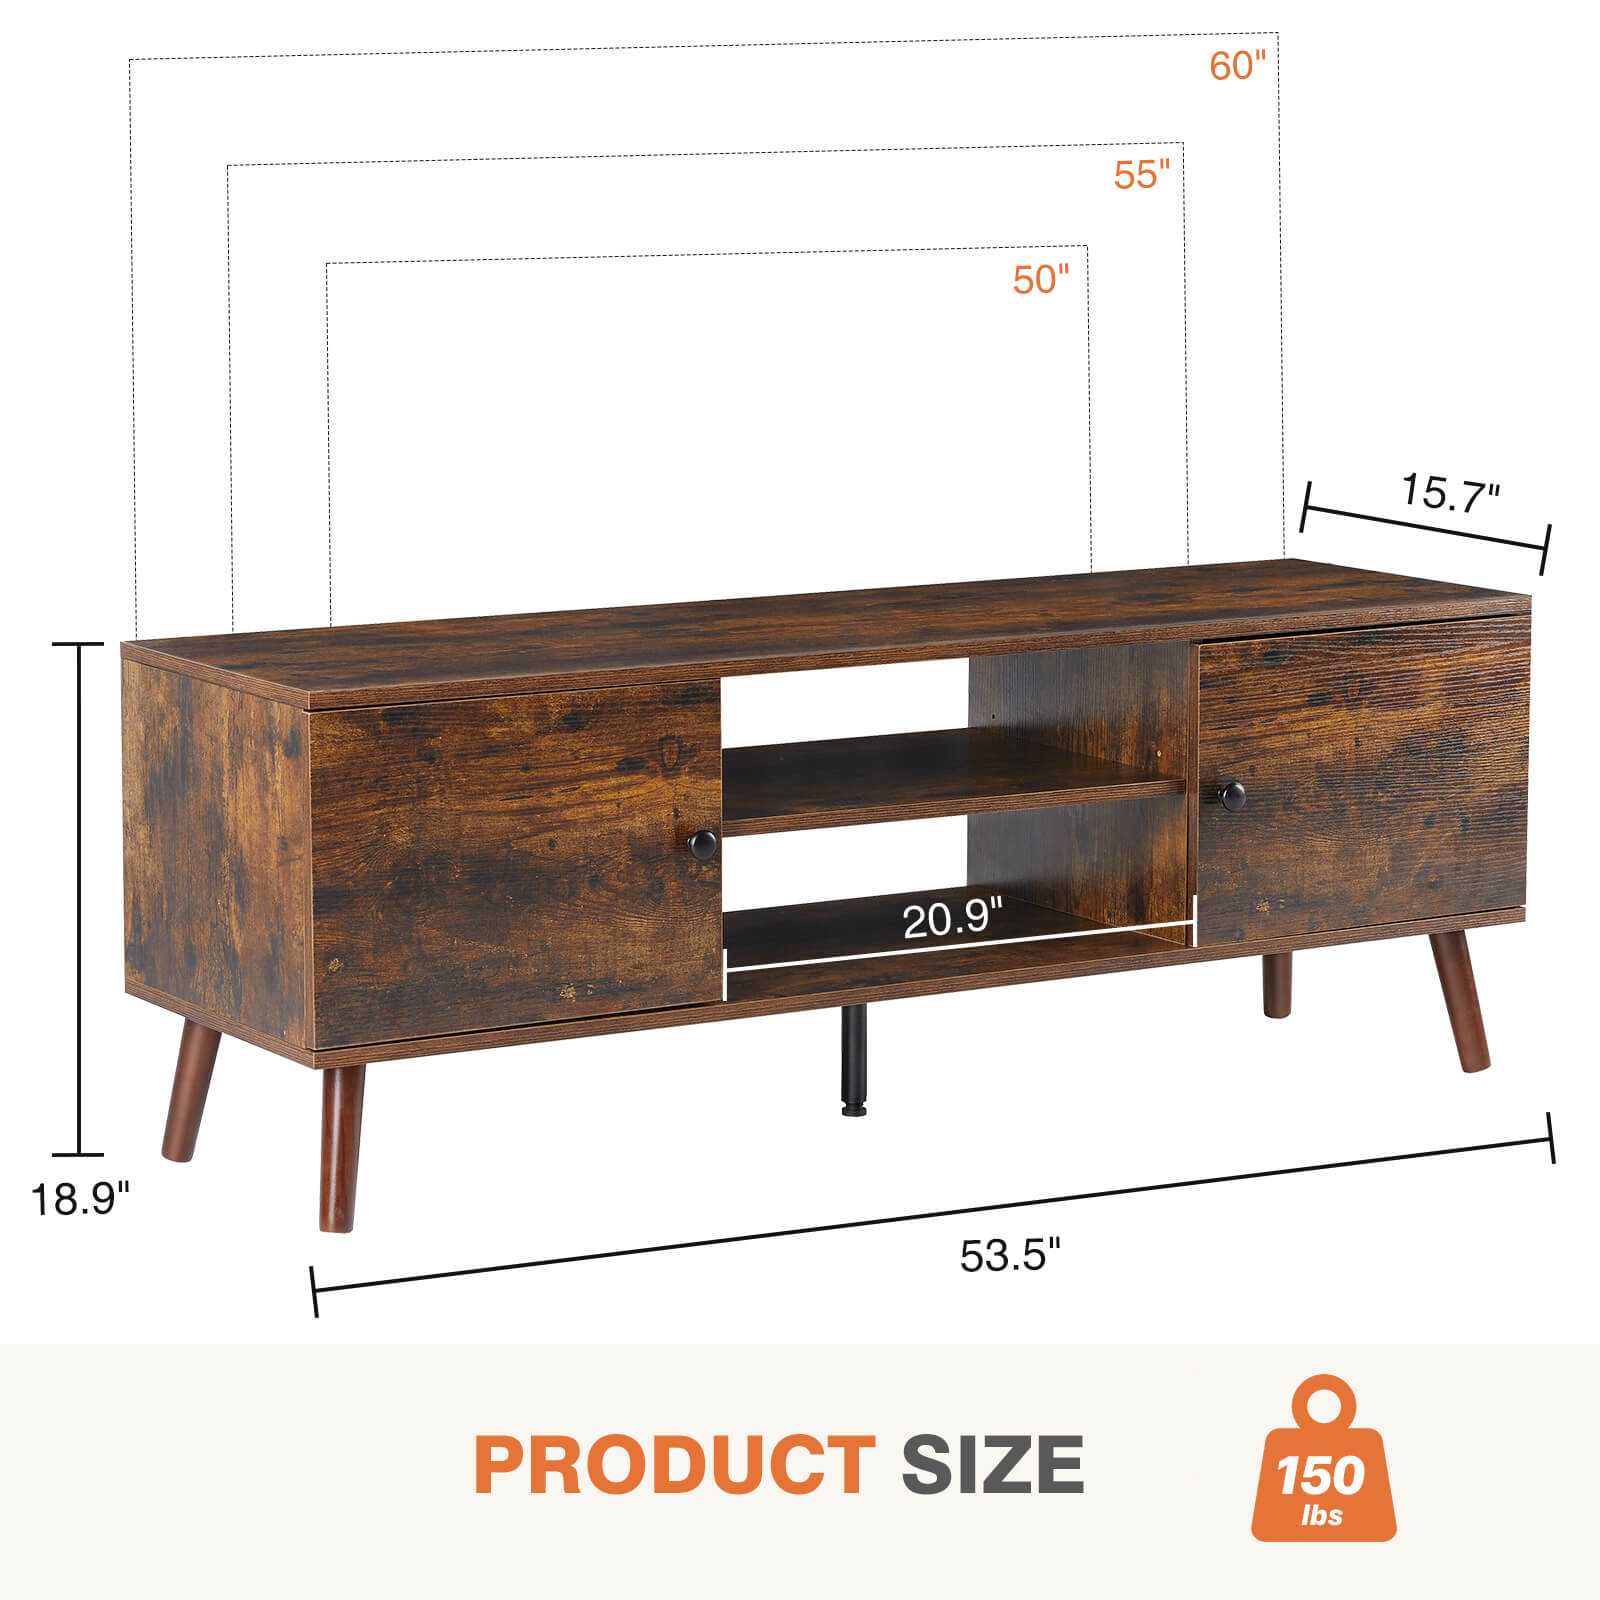 Wooden TV stand - for TVs up to 60 inches with adjustable shelves with double storage cabinets for living room, bedroom, patio, etc.